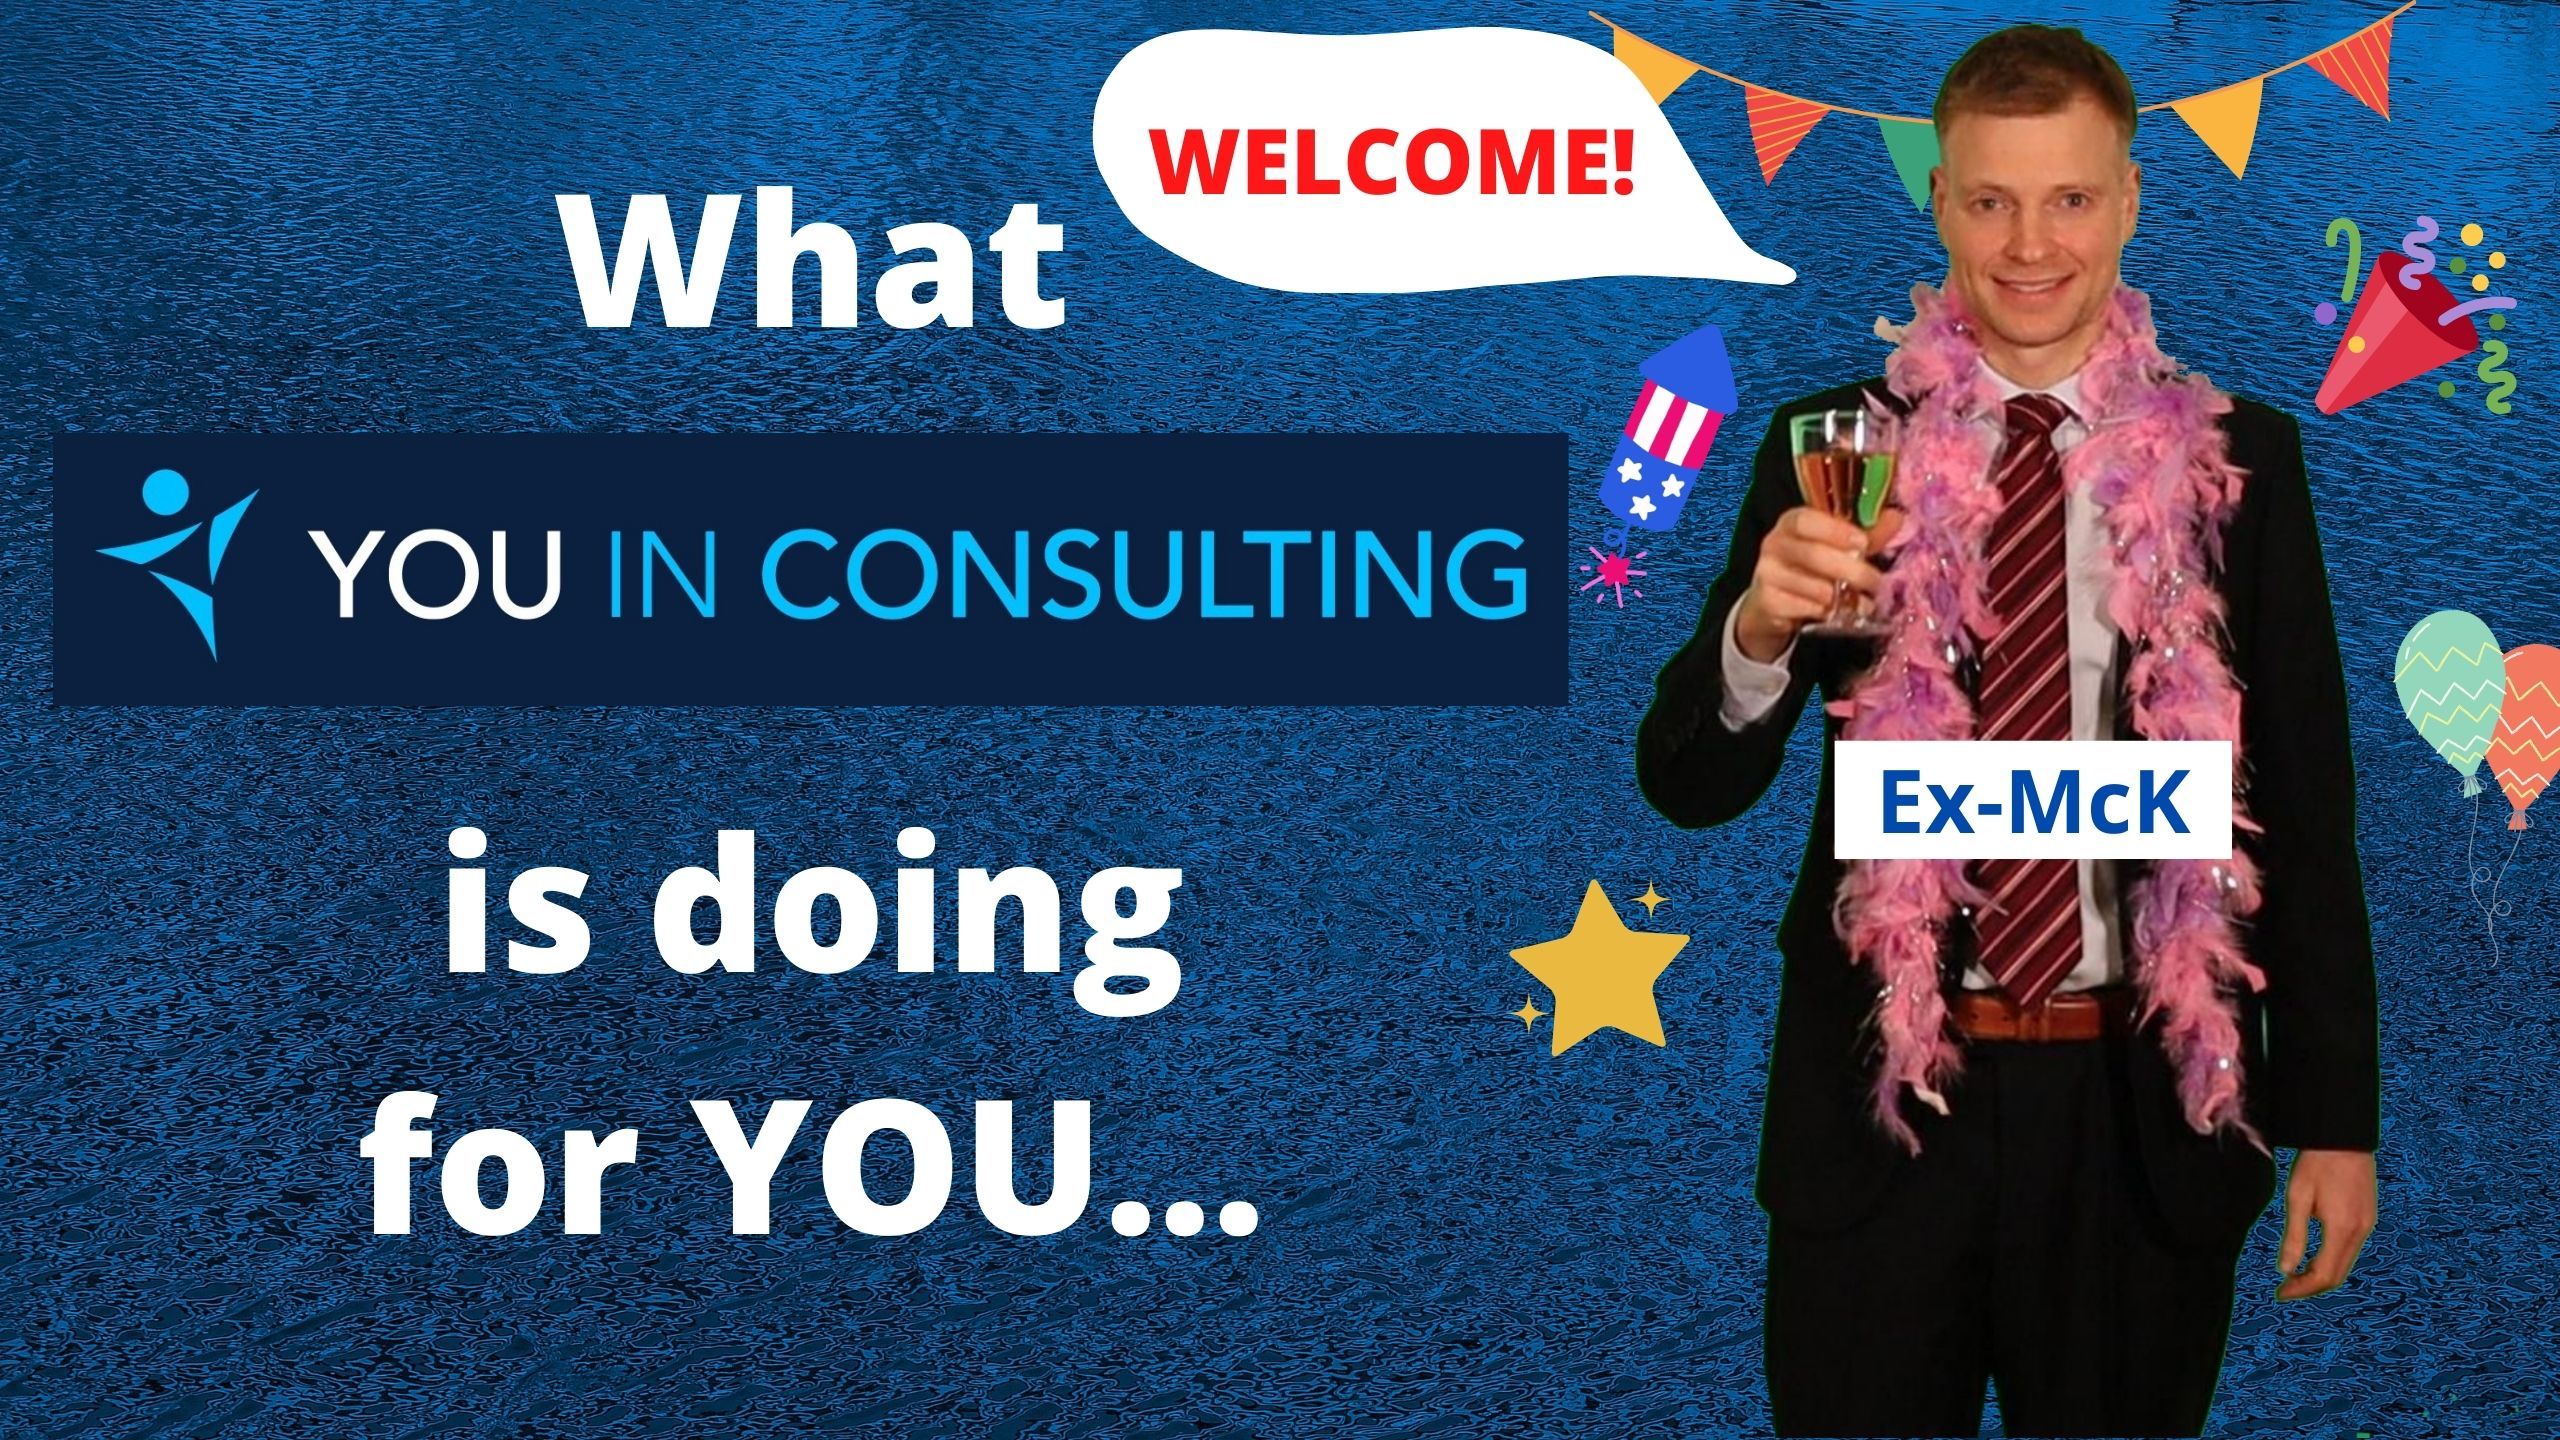 Welcome to YOUinConsulting